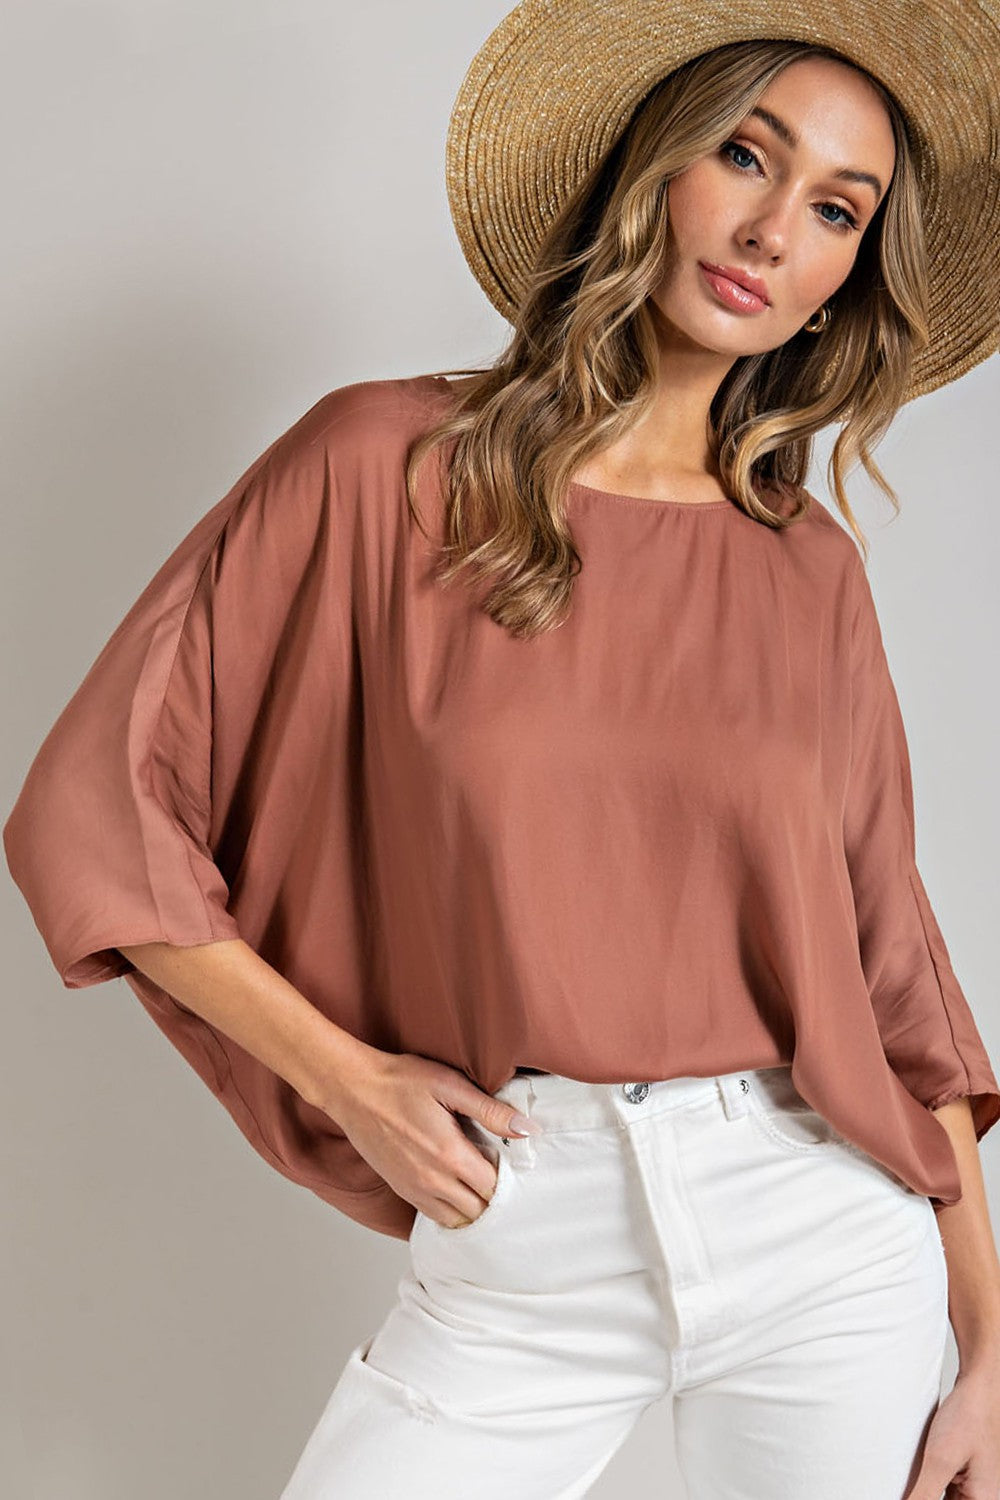 : Timeless Treasures Rust Satin Blouse - Catching Fireflies Boutique